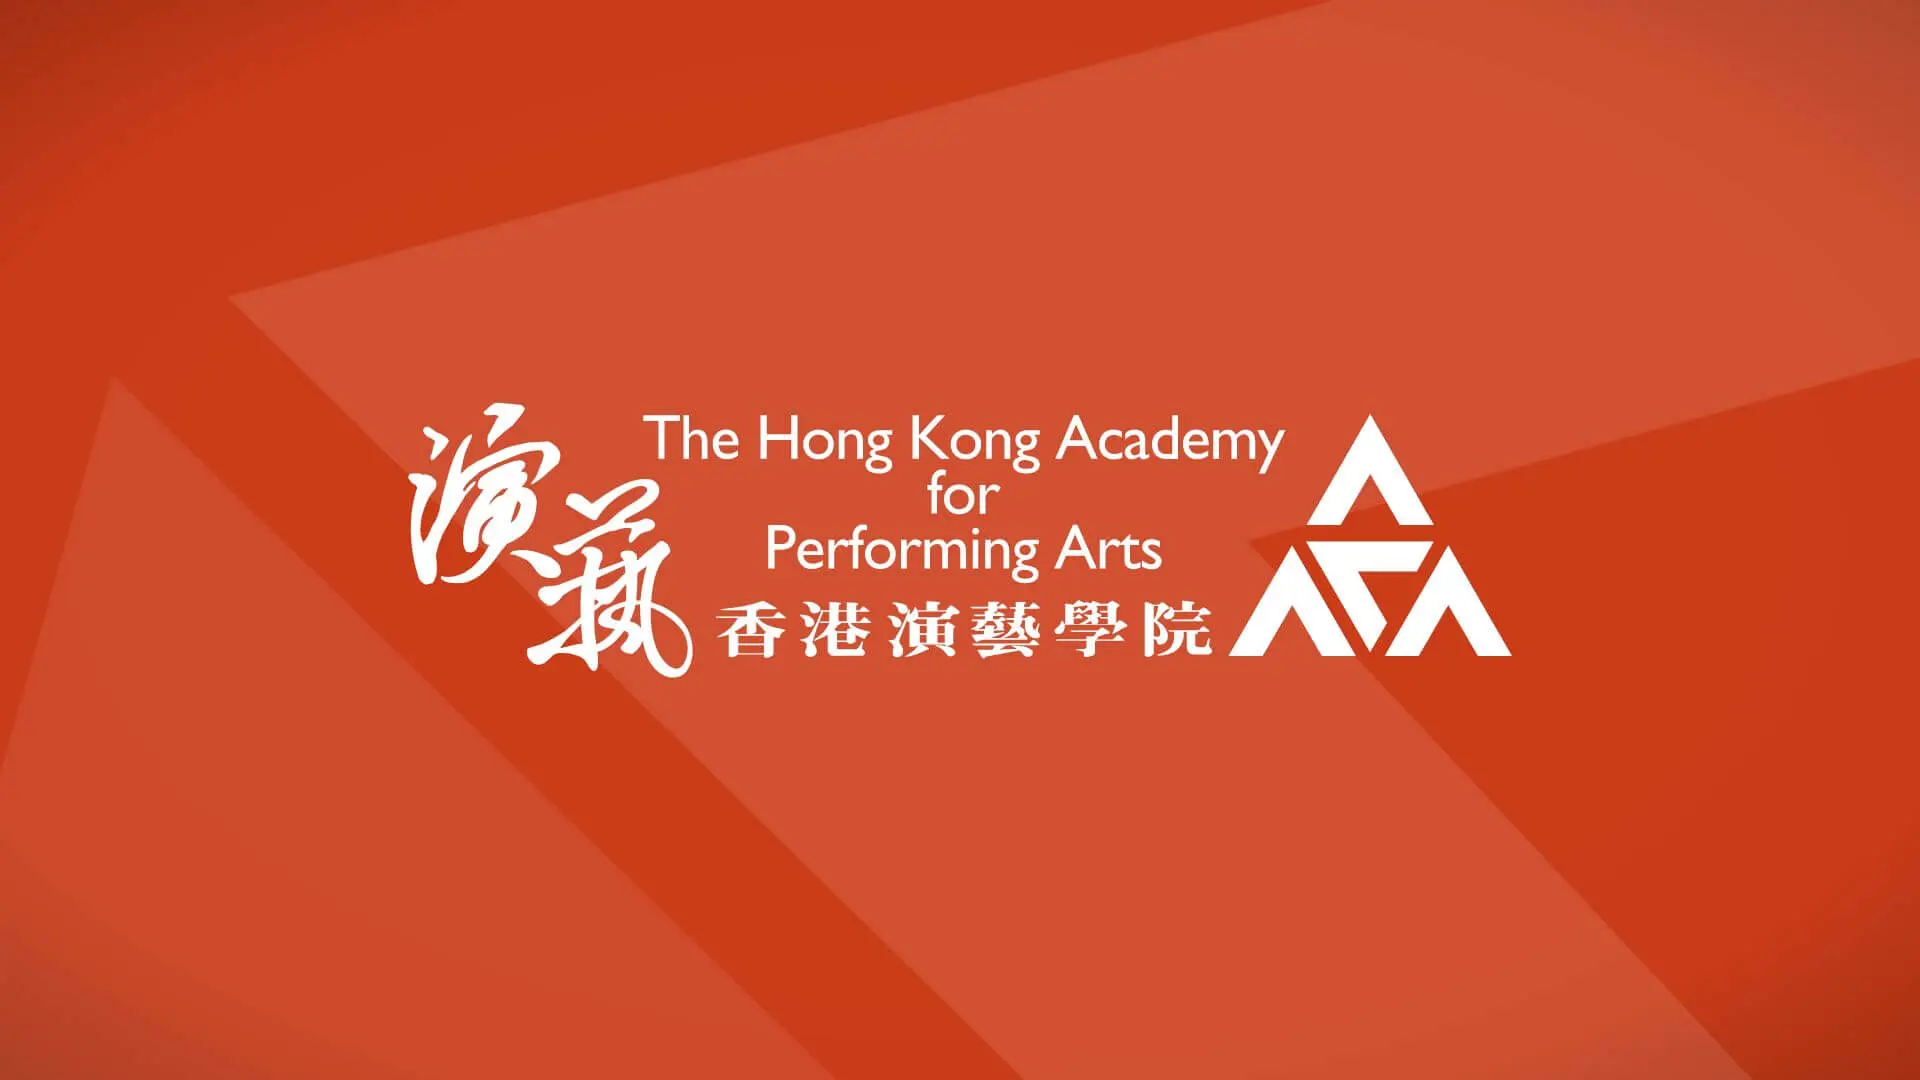 (Cancelled) Academy Postgraduate Music Lecture-Recital - Lee Tin-chung (Saxophone)